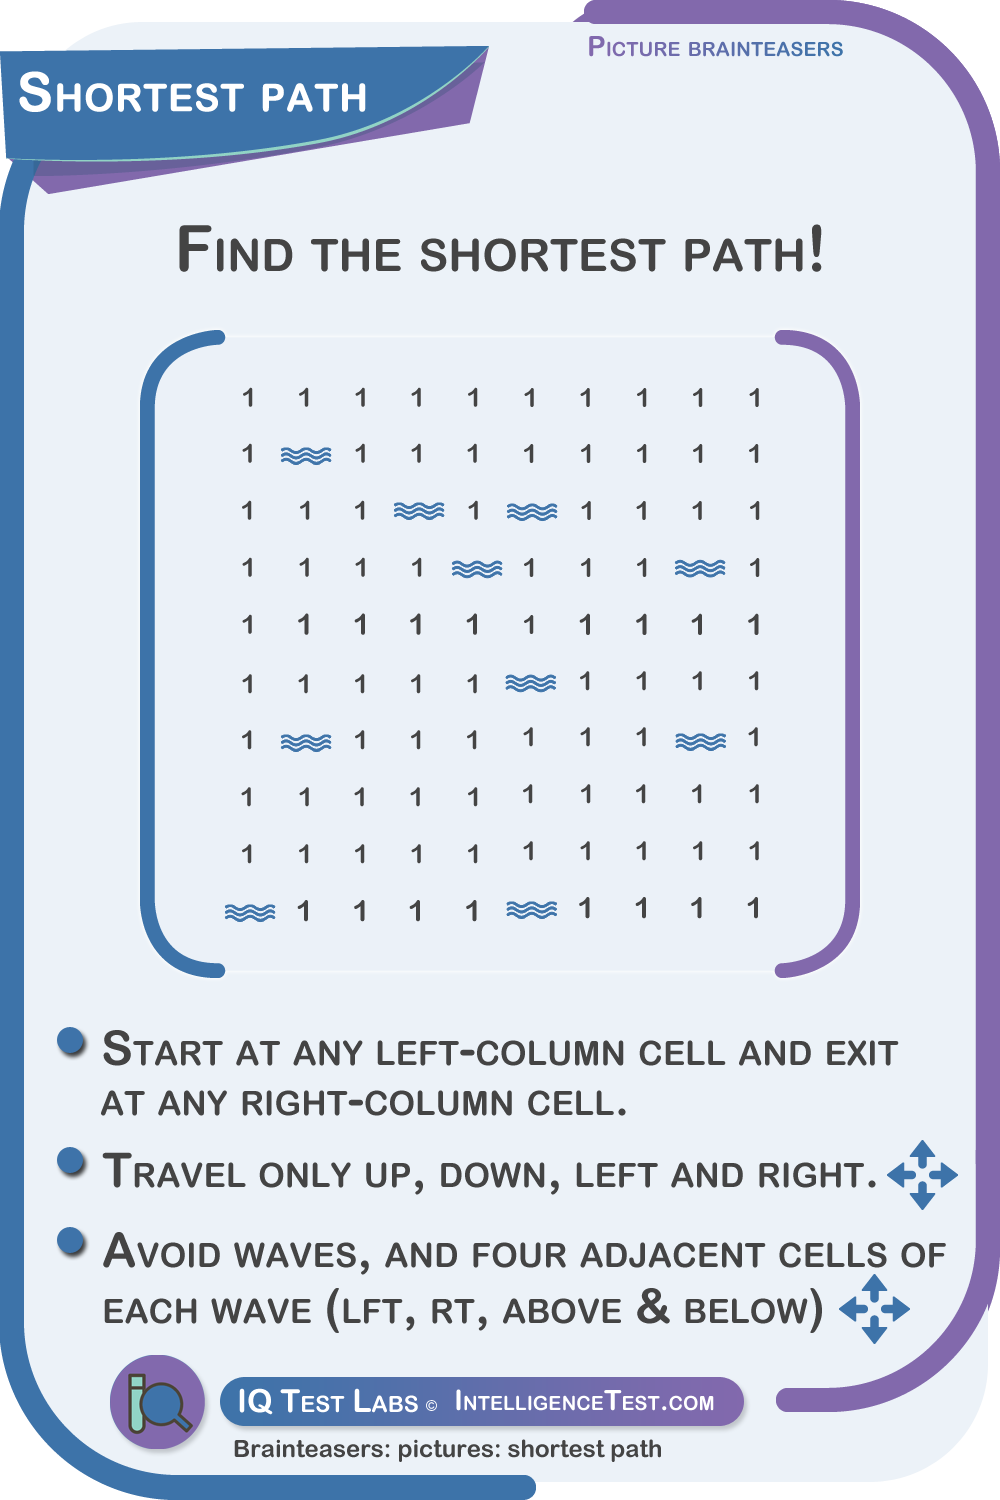 Find the shortest path.